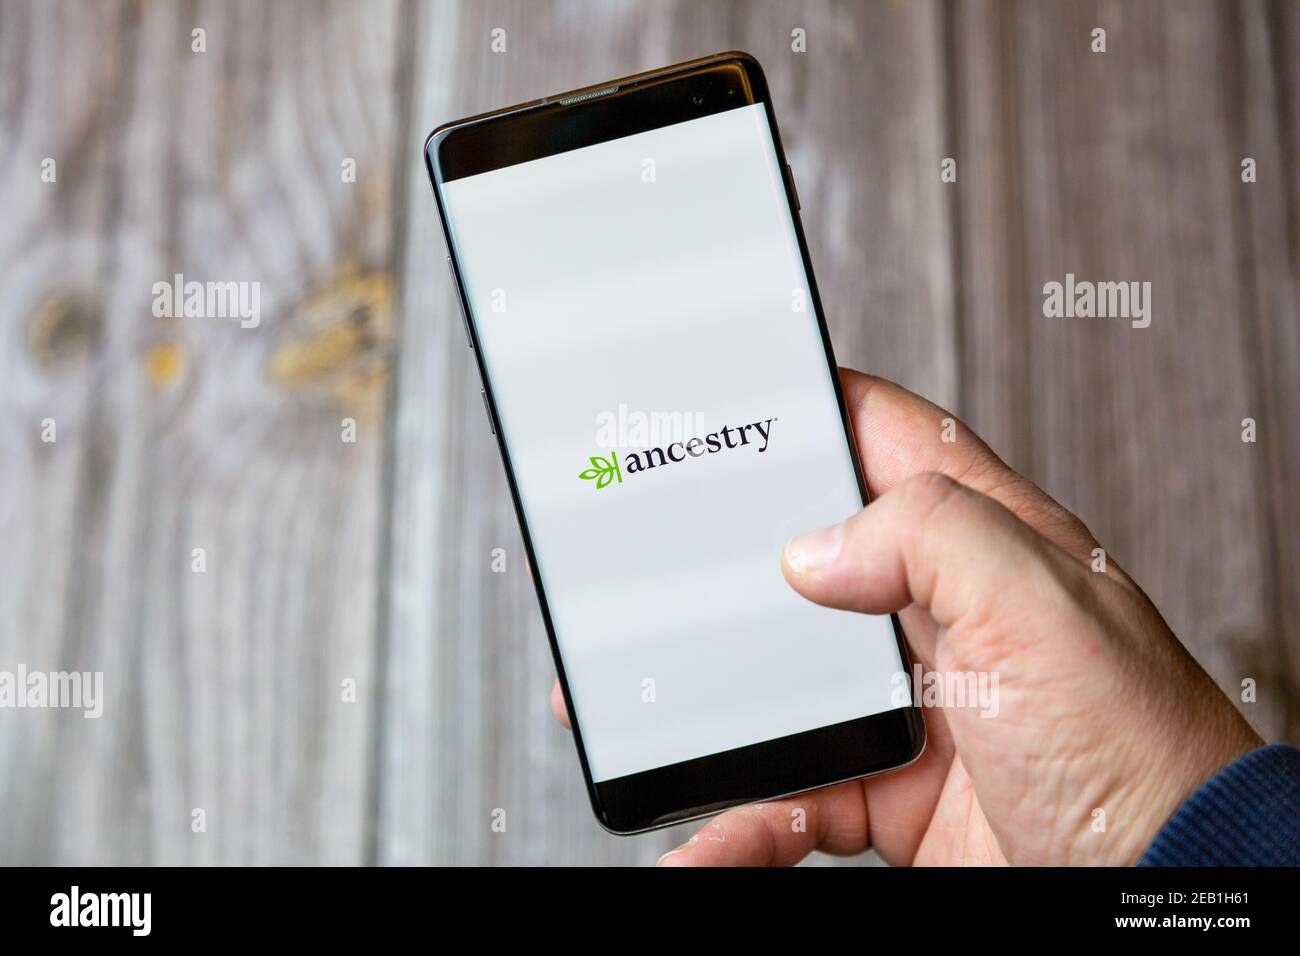 A mobile phone or cell phone being held by a hand with the Ancestry app open on screen Stock Photo